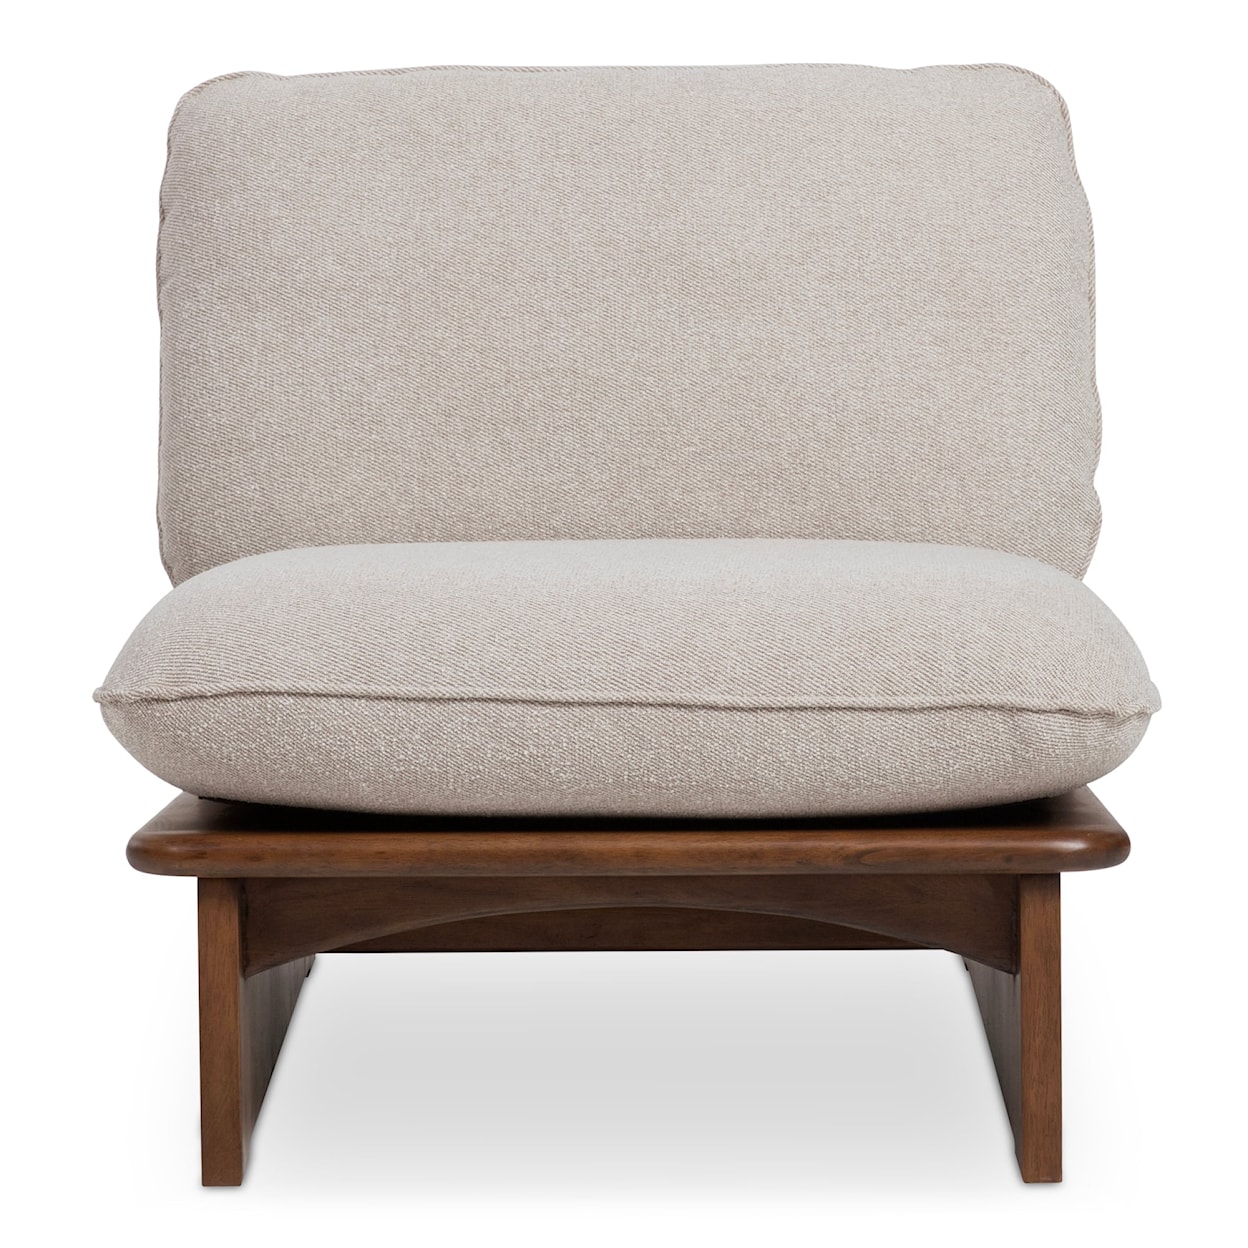 Moe's Home Collection Edwin Slipper Chair